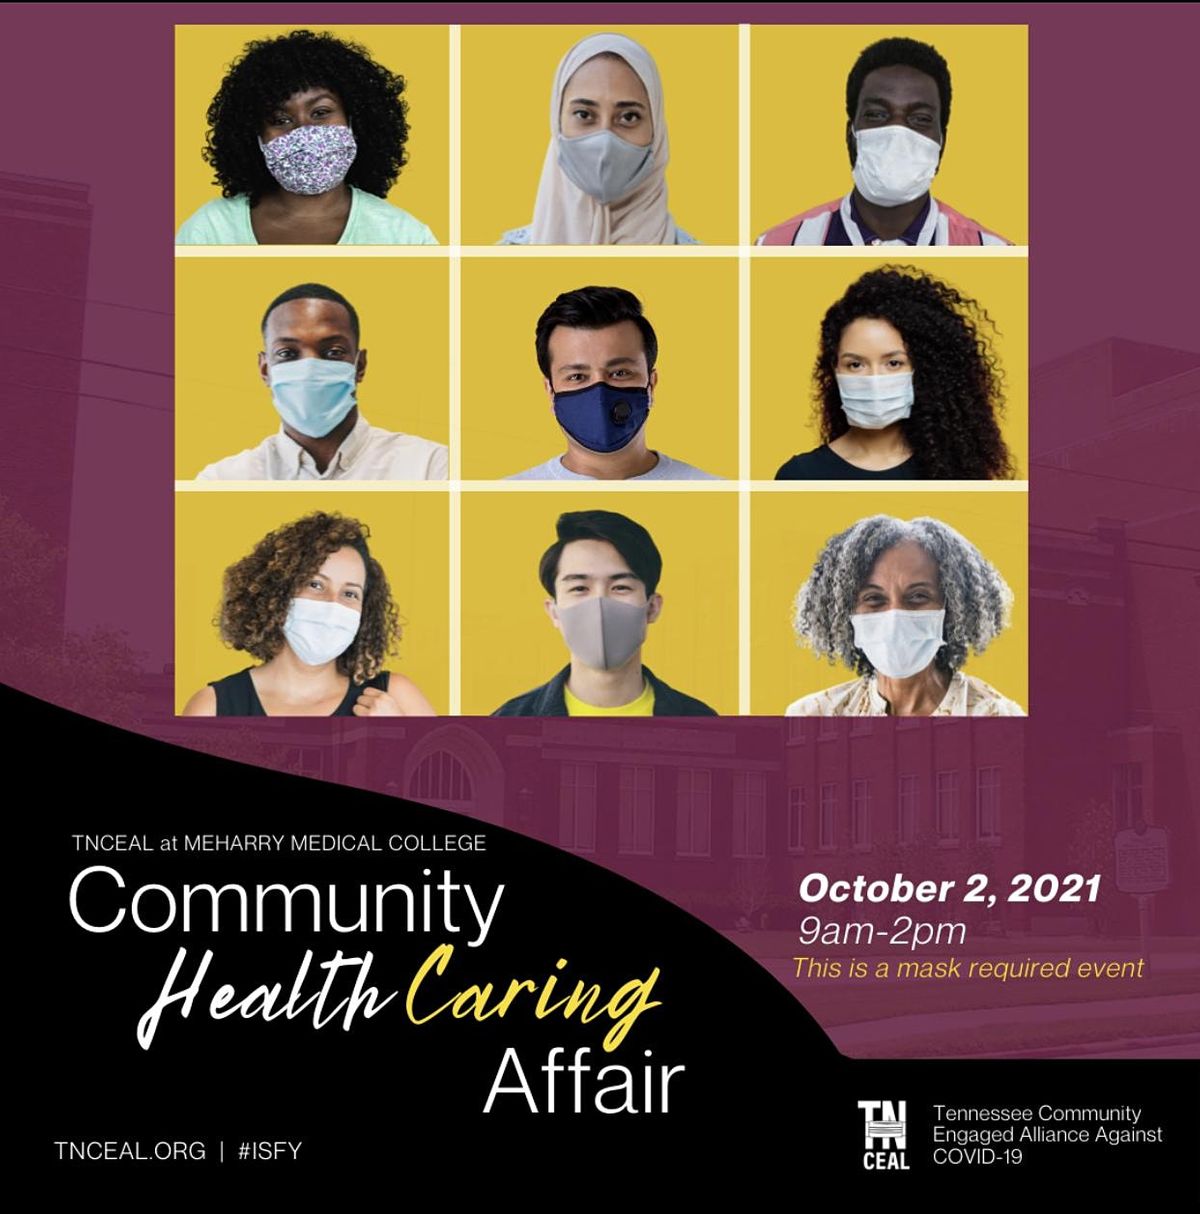 tnceal-at-meharry-medical-college-community-care-affair-2021-1005-dr